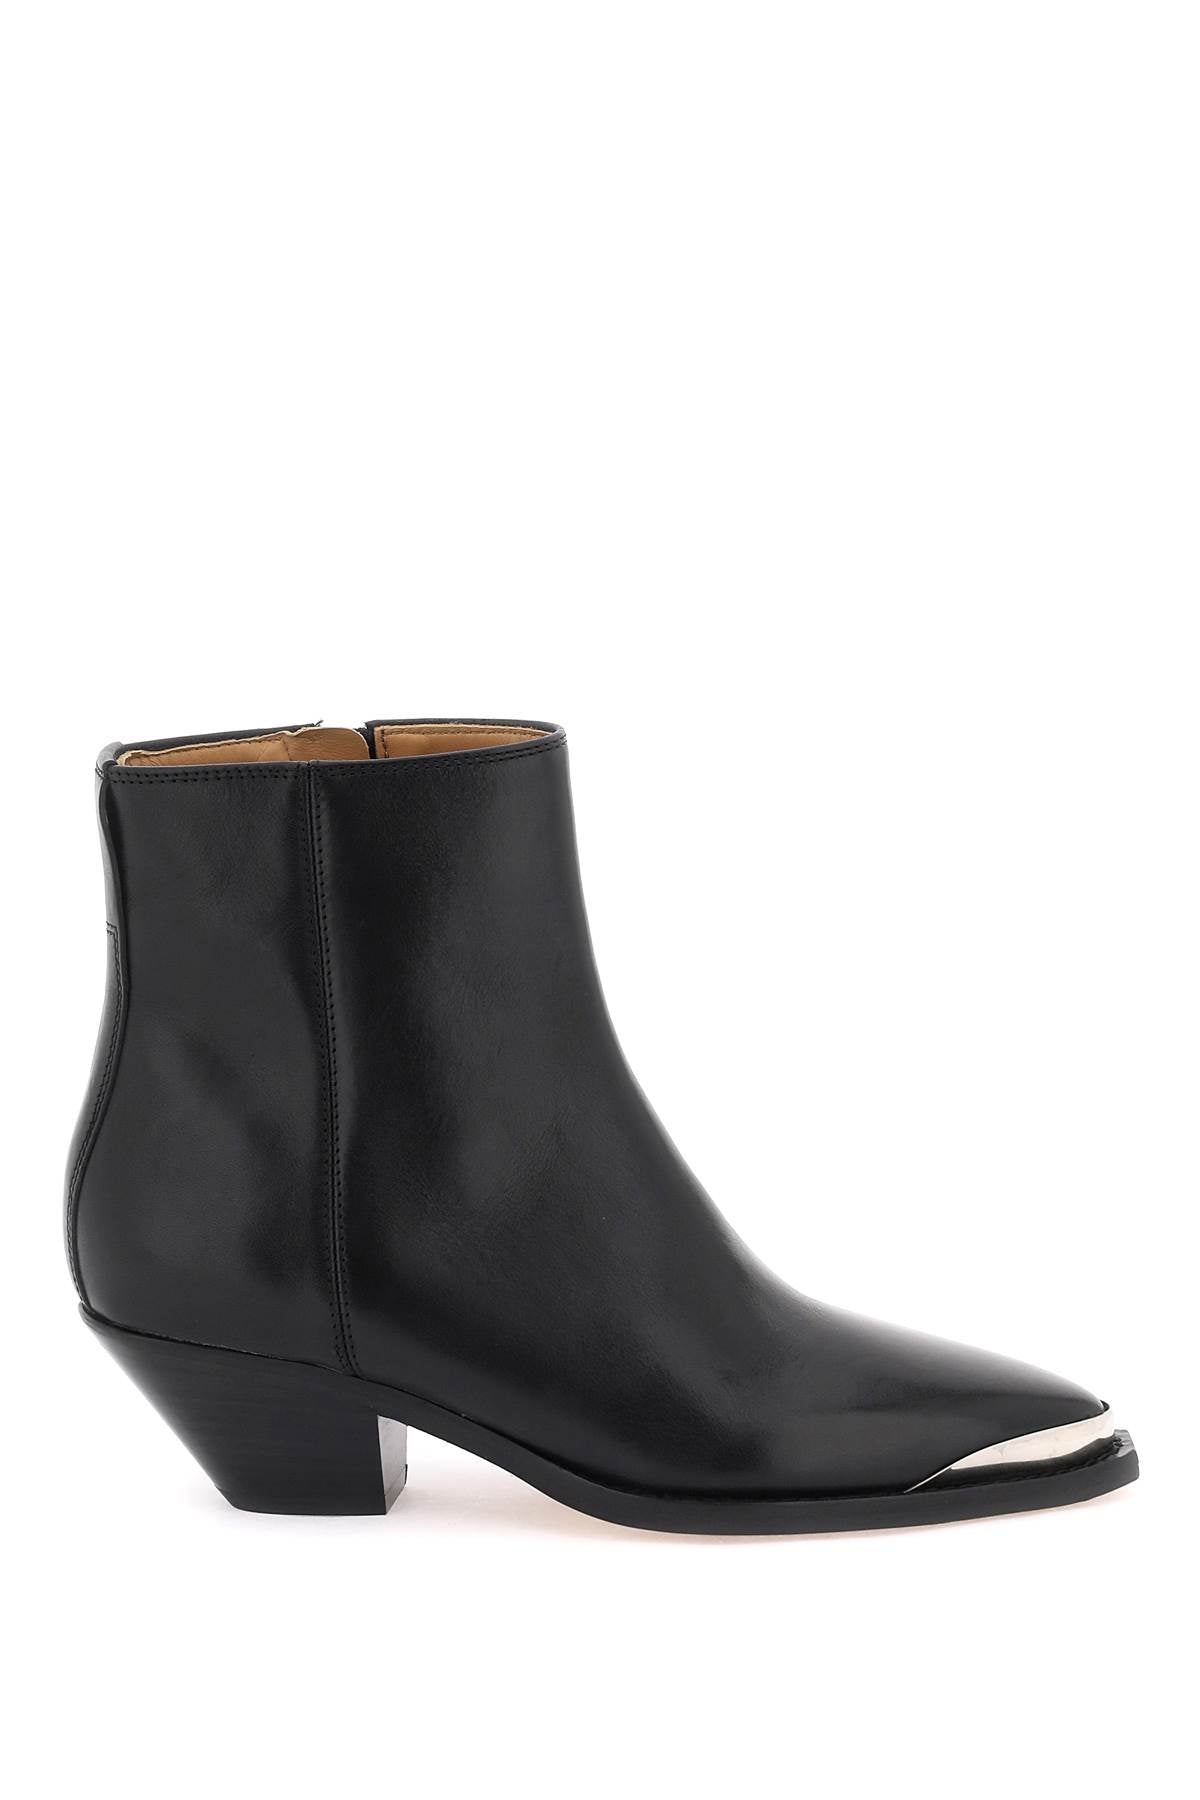 Isabel marant adnae ankle boots-0